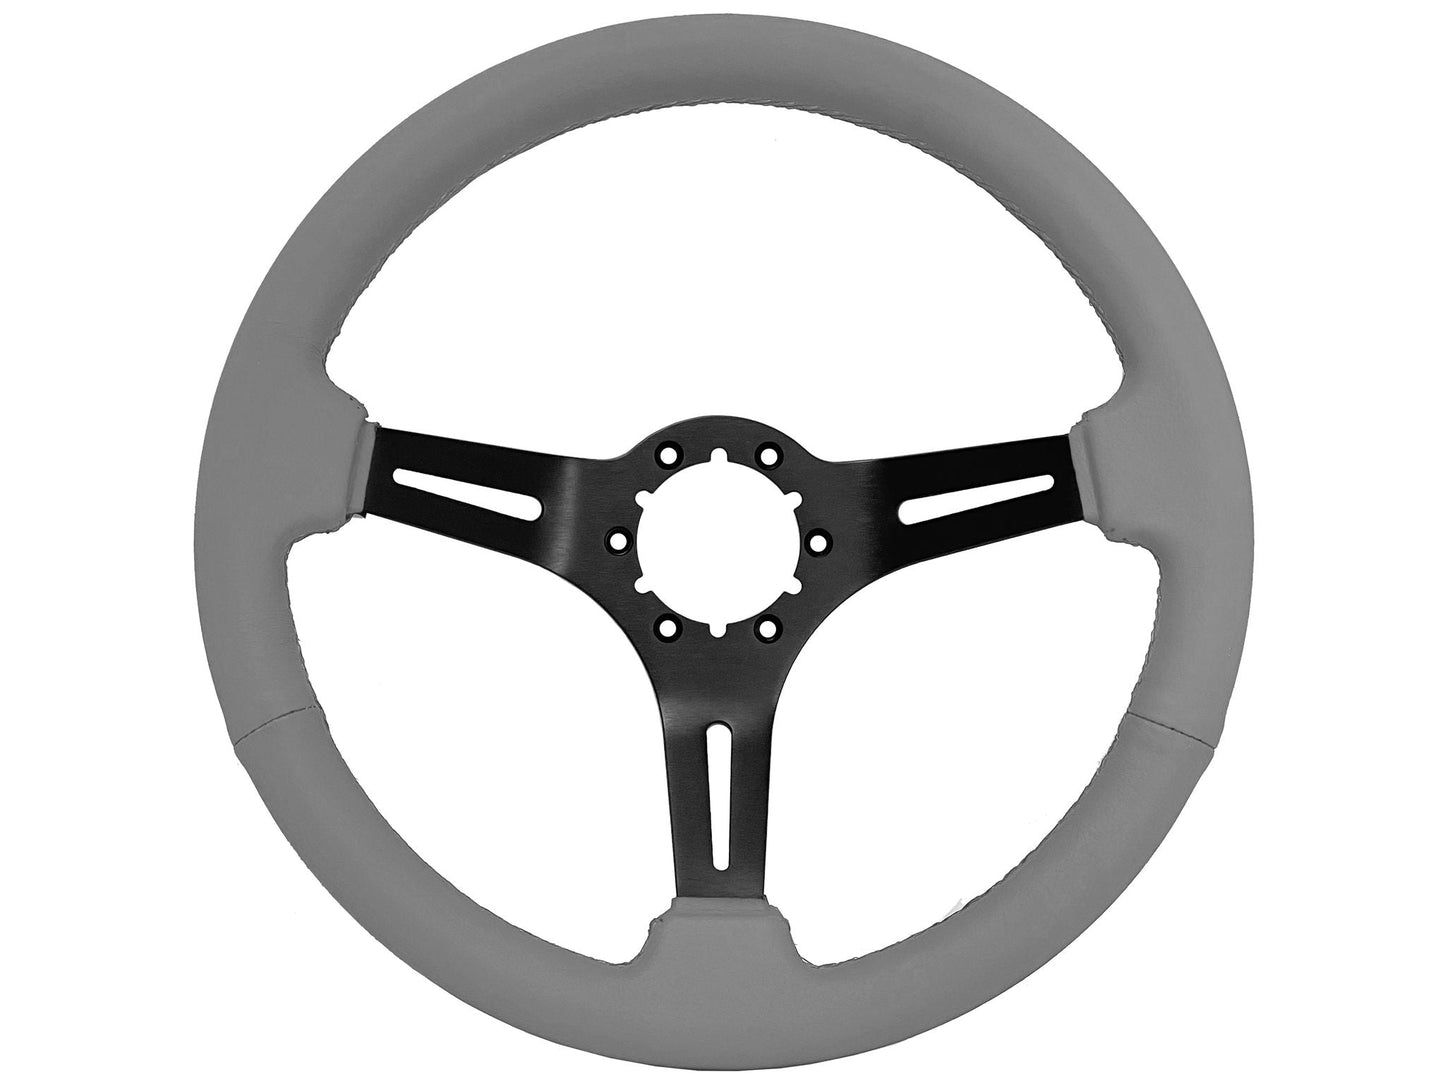 1998+ Audi A4 Steering Wheel Kit | Grey Leather | ST3060GRY